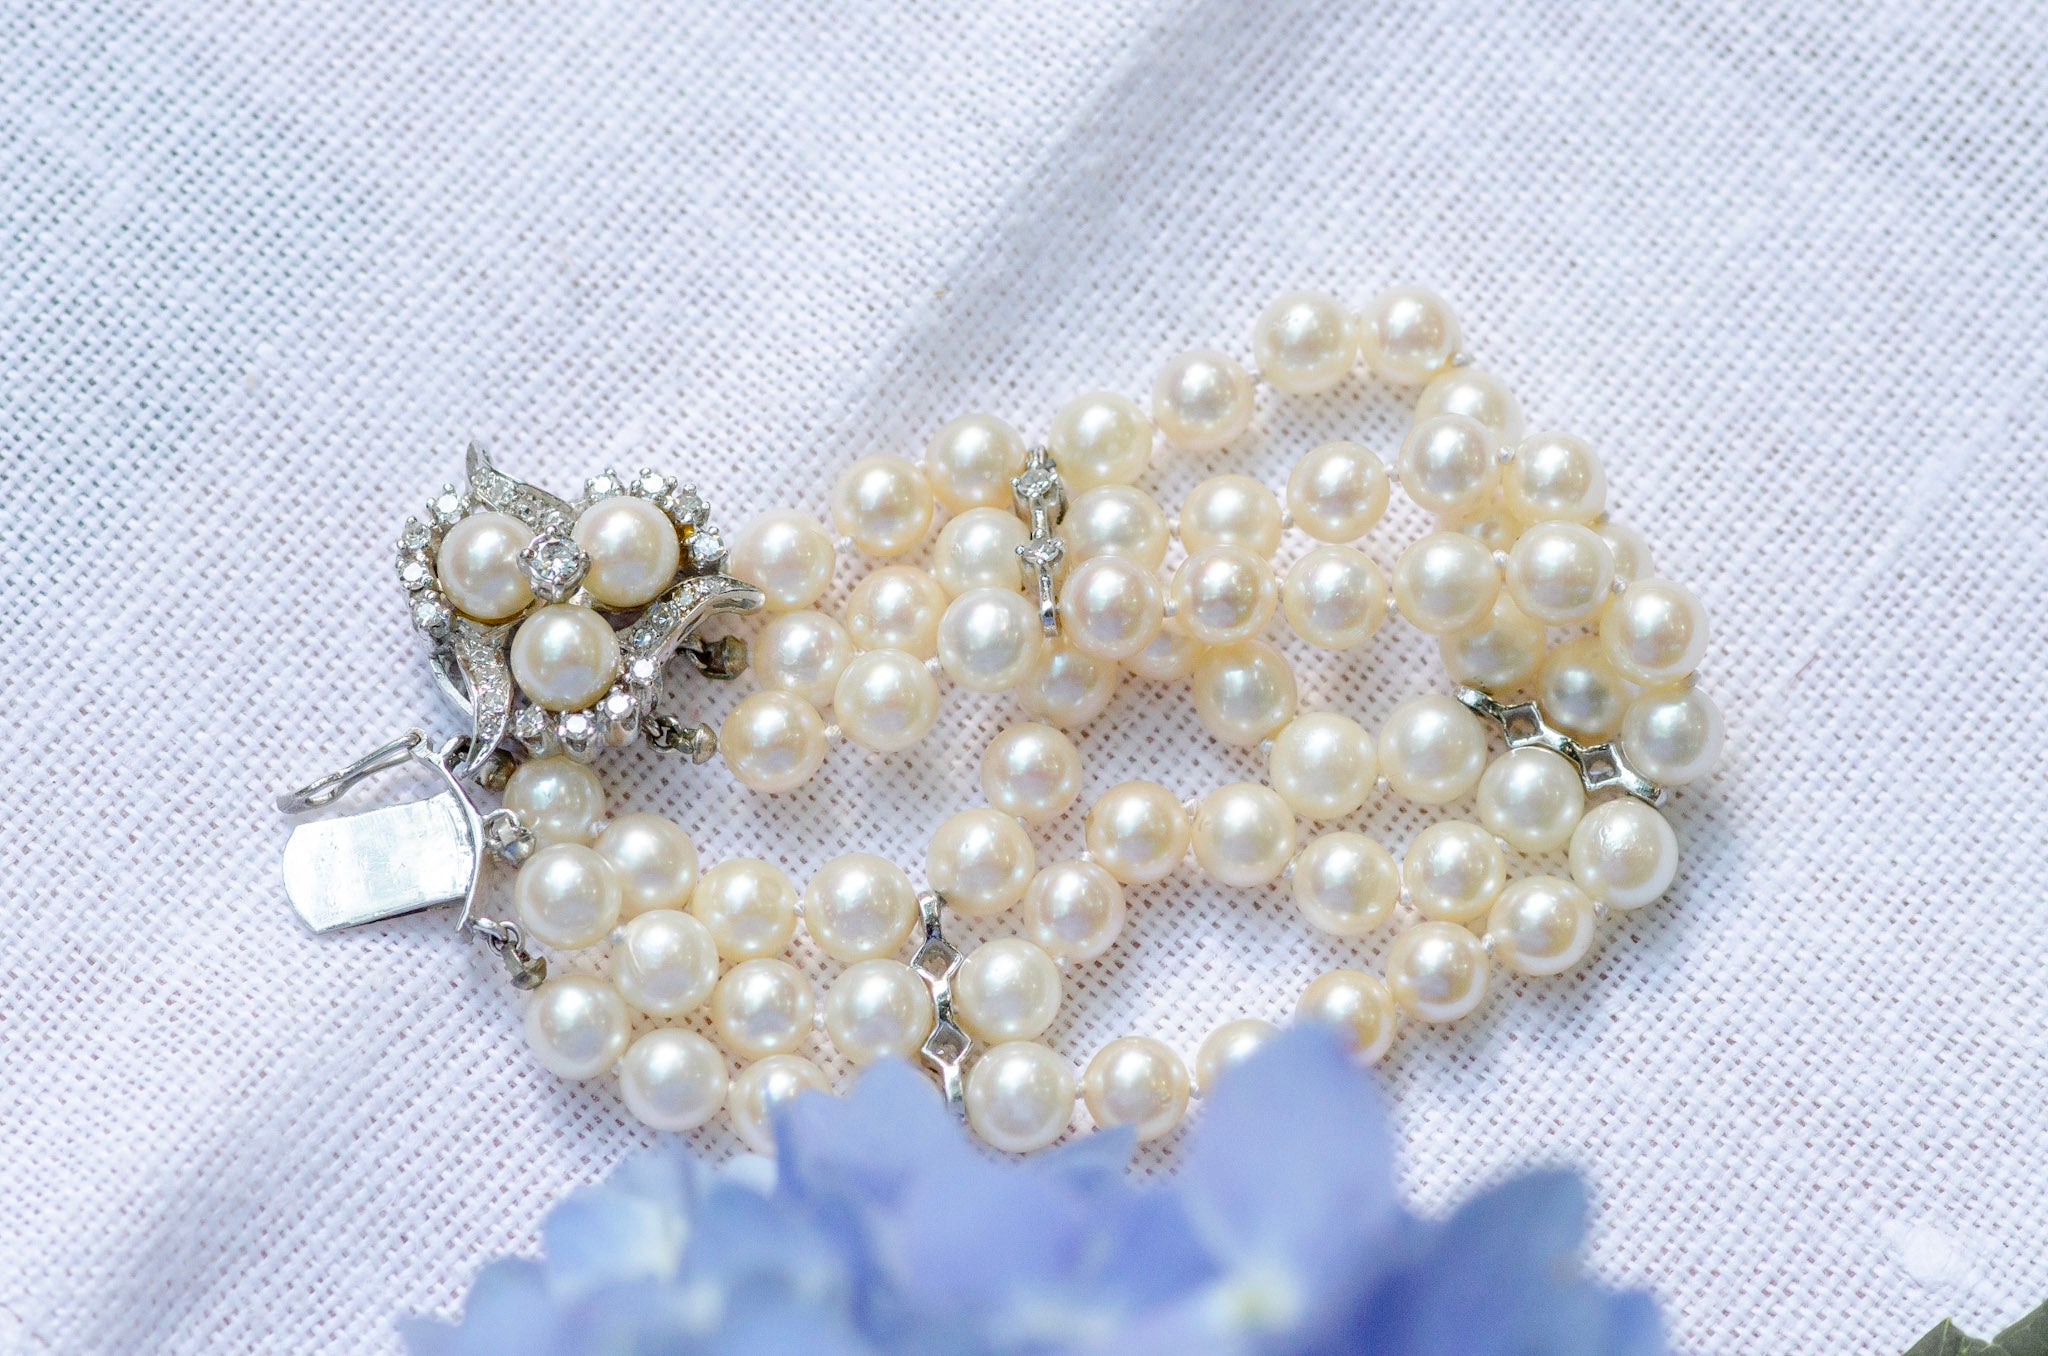 The Brittingham Collection 3 strand Pearl bracelet